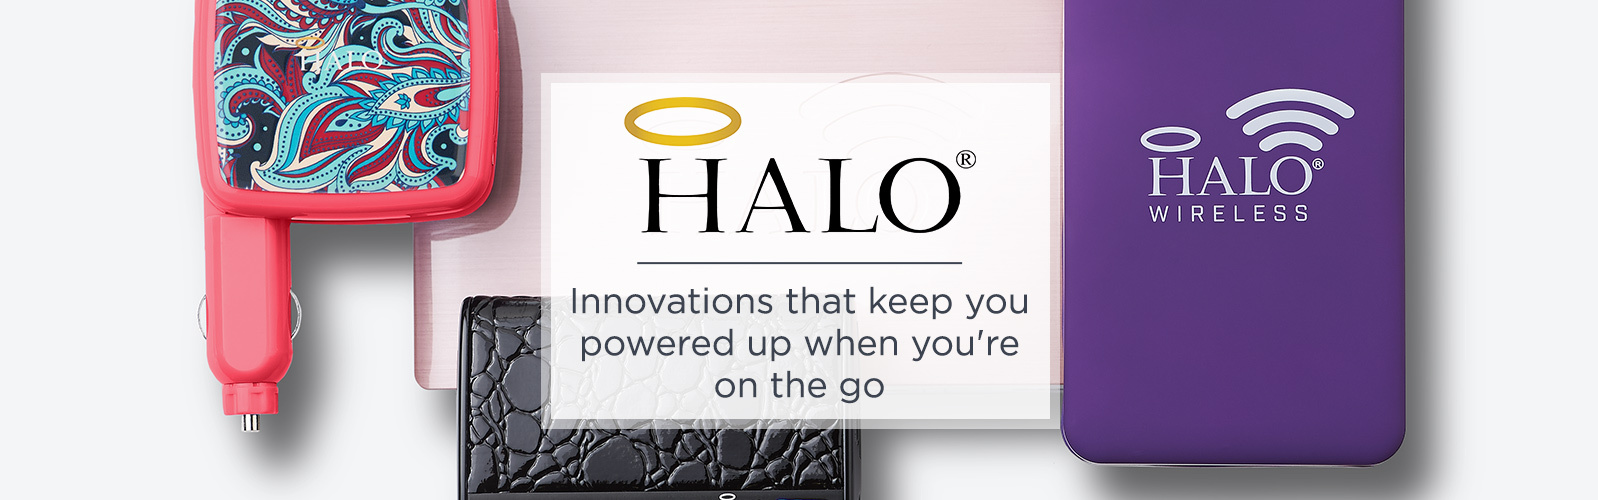 HALO®, Innovations that keep you powered up when you're on the go